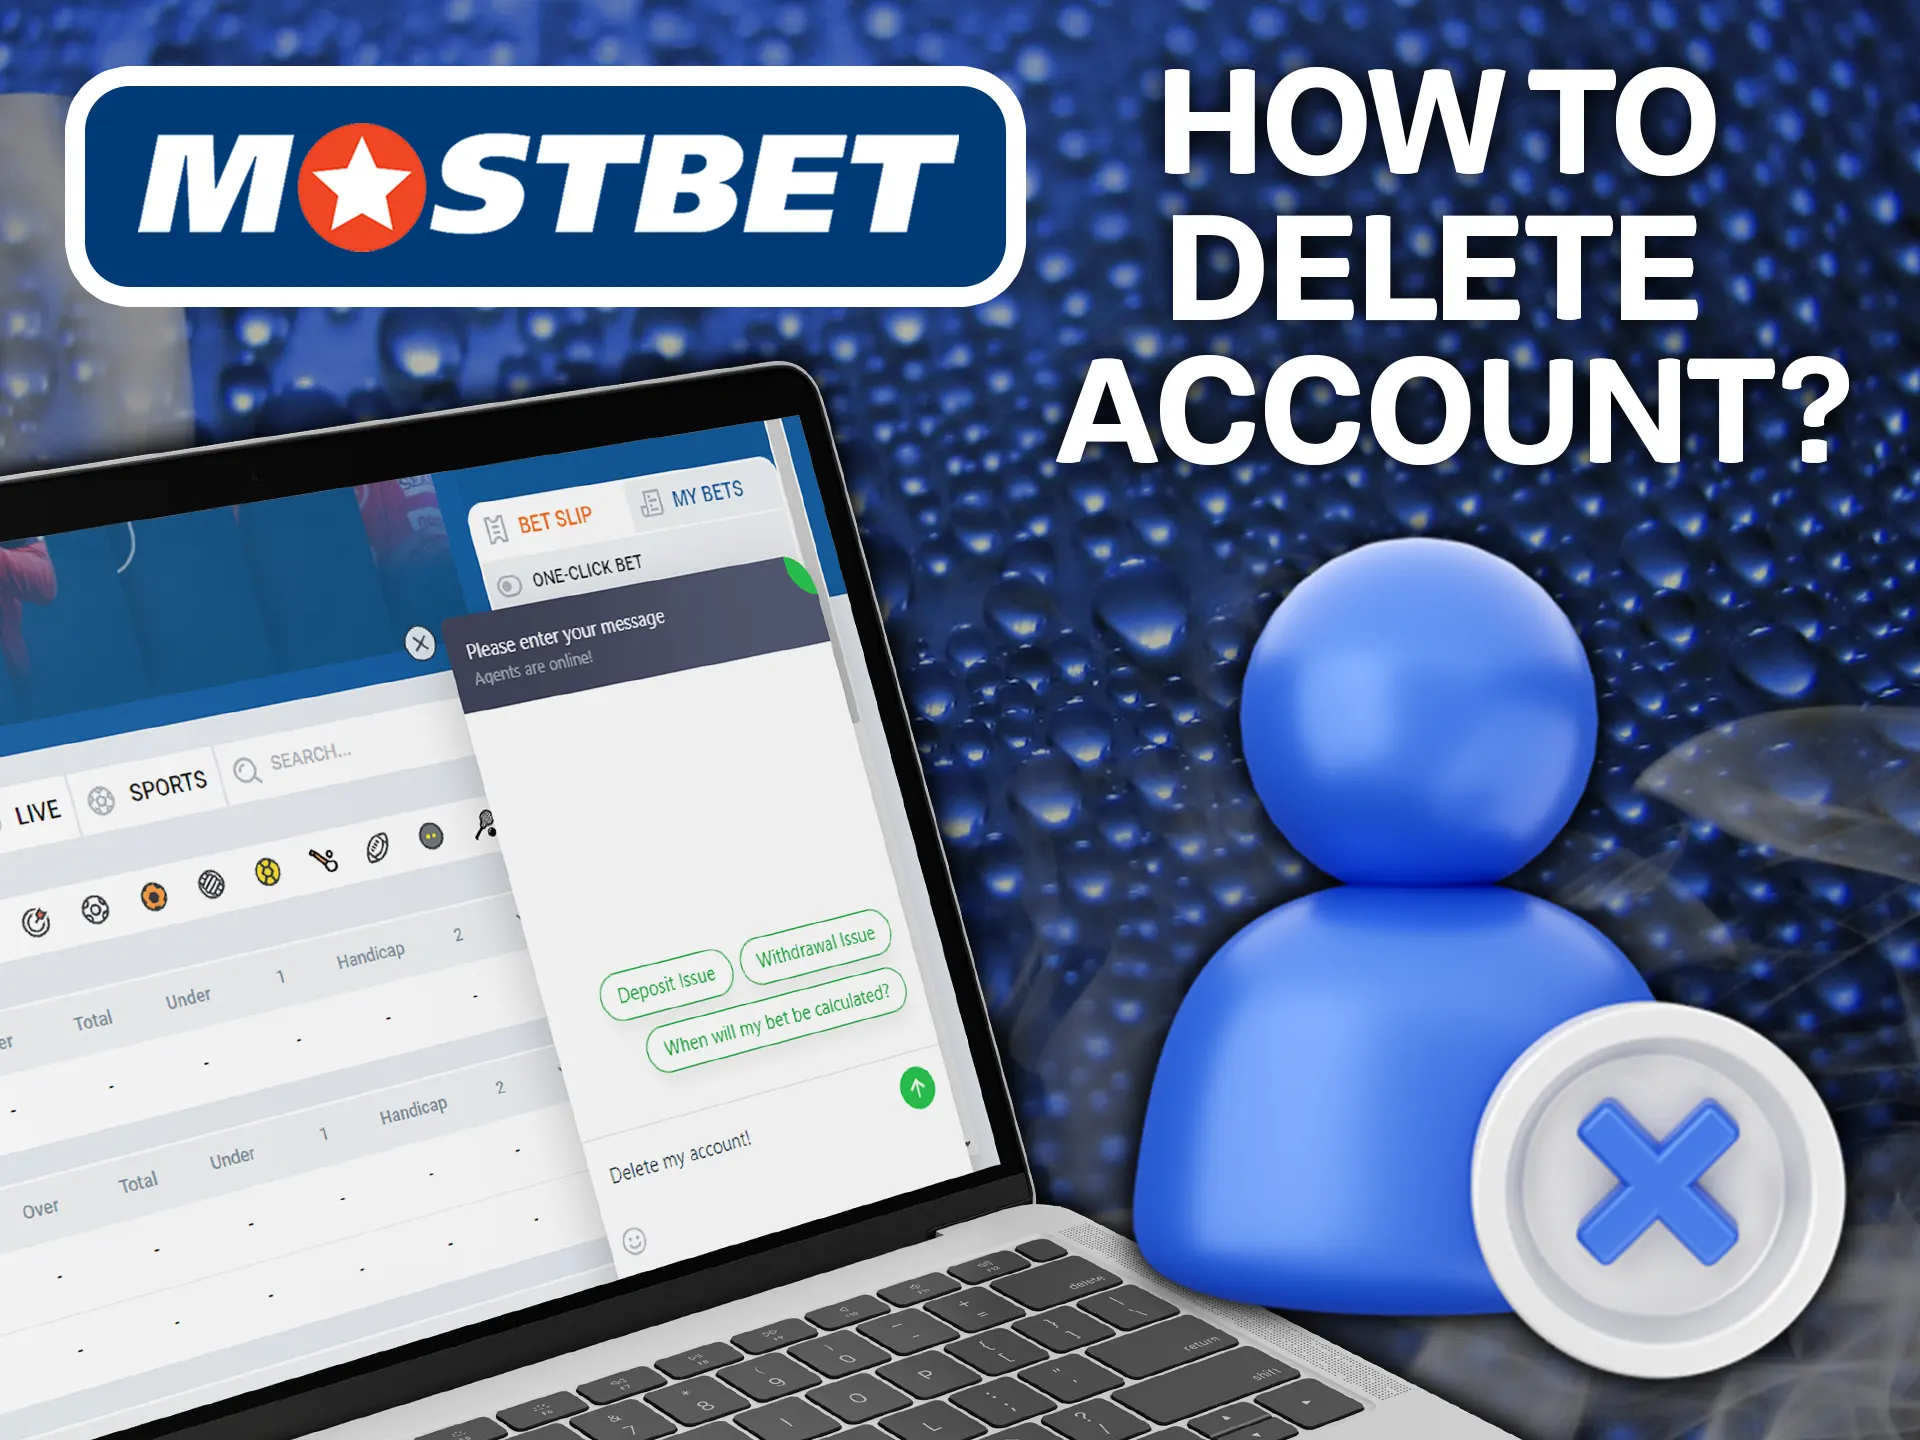 Delete your by asking Mostbet support.